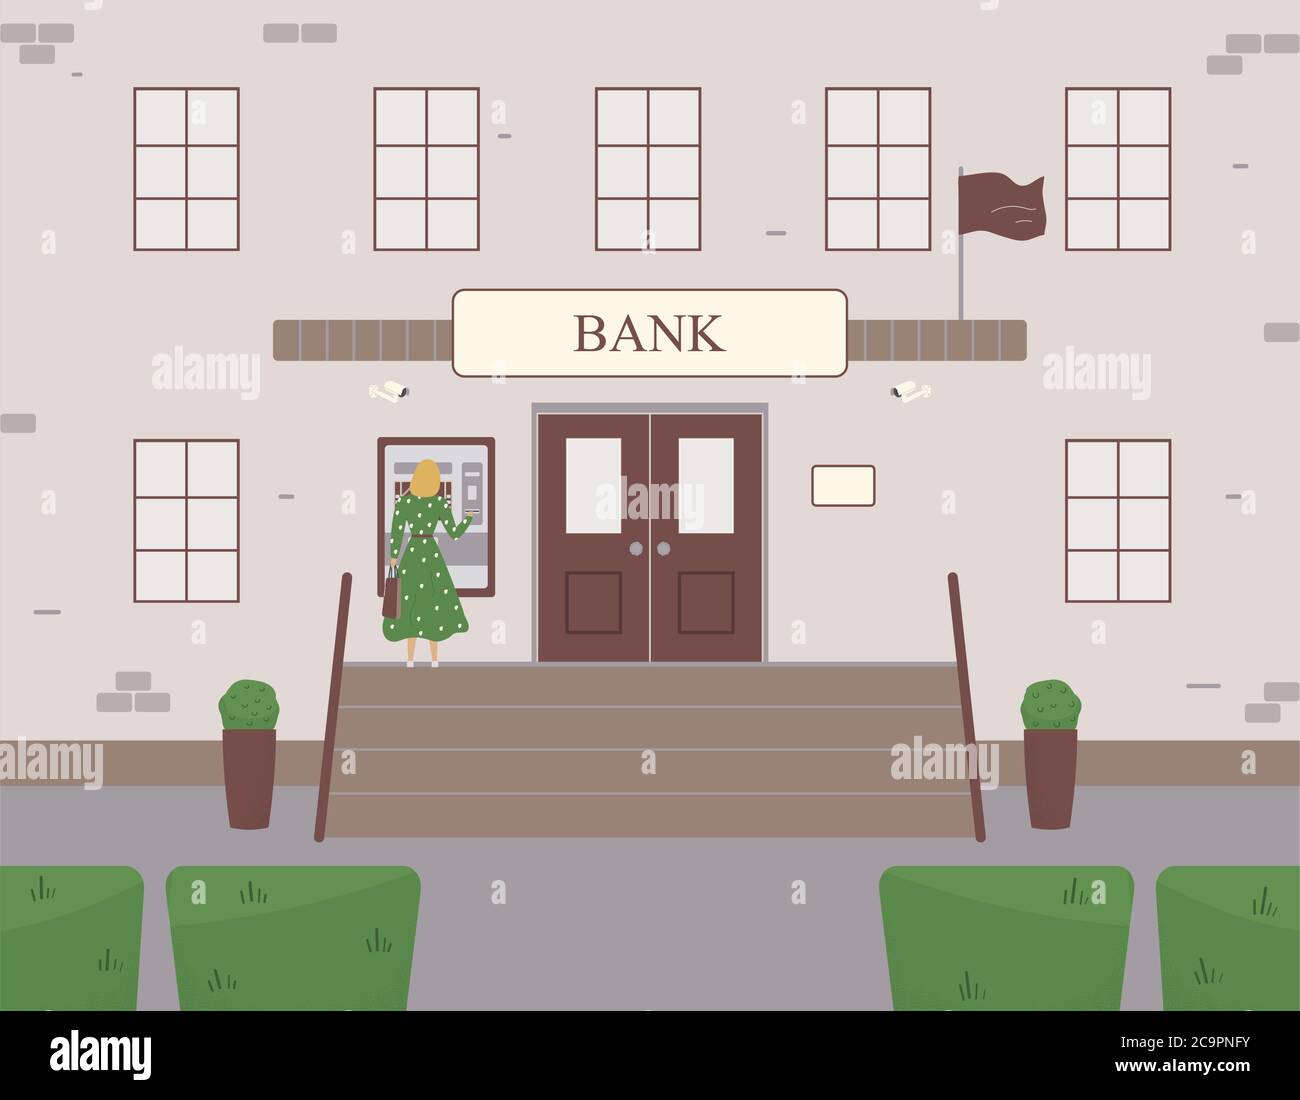 Facade of the bank with girl standing near ATM. Entrance with classic brick porch with steps and surveillance cameras to financial institution Stock Vector